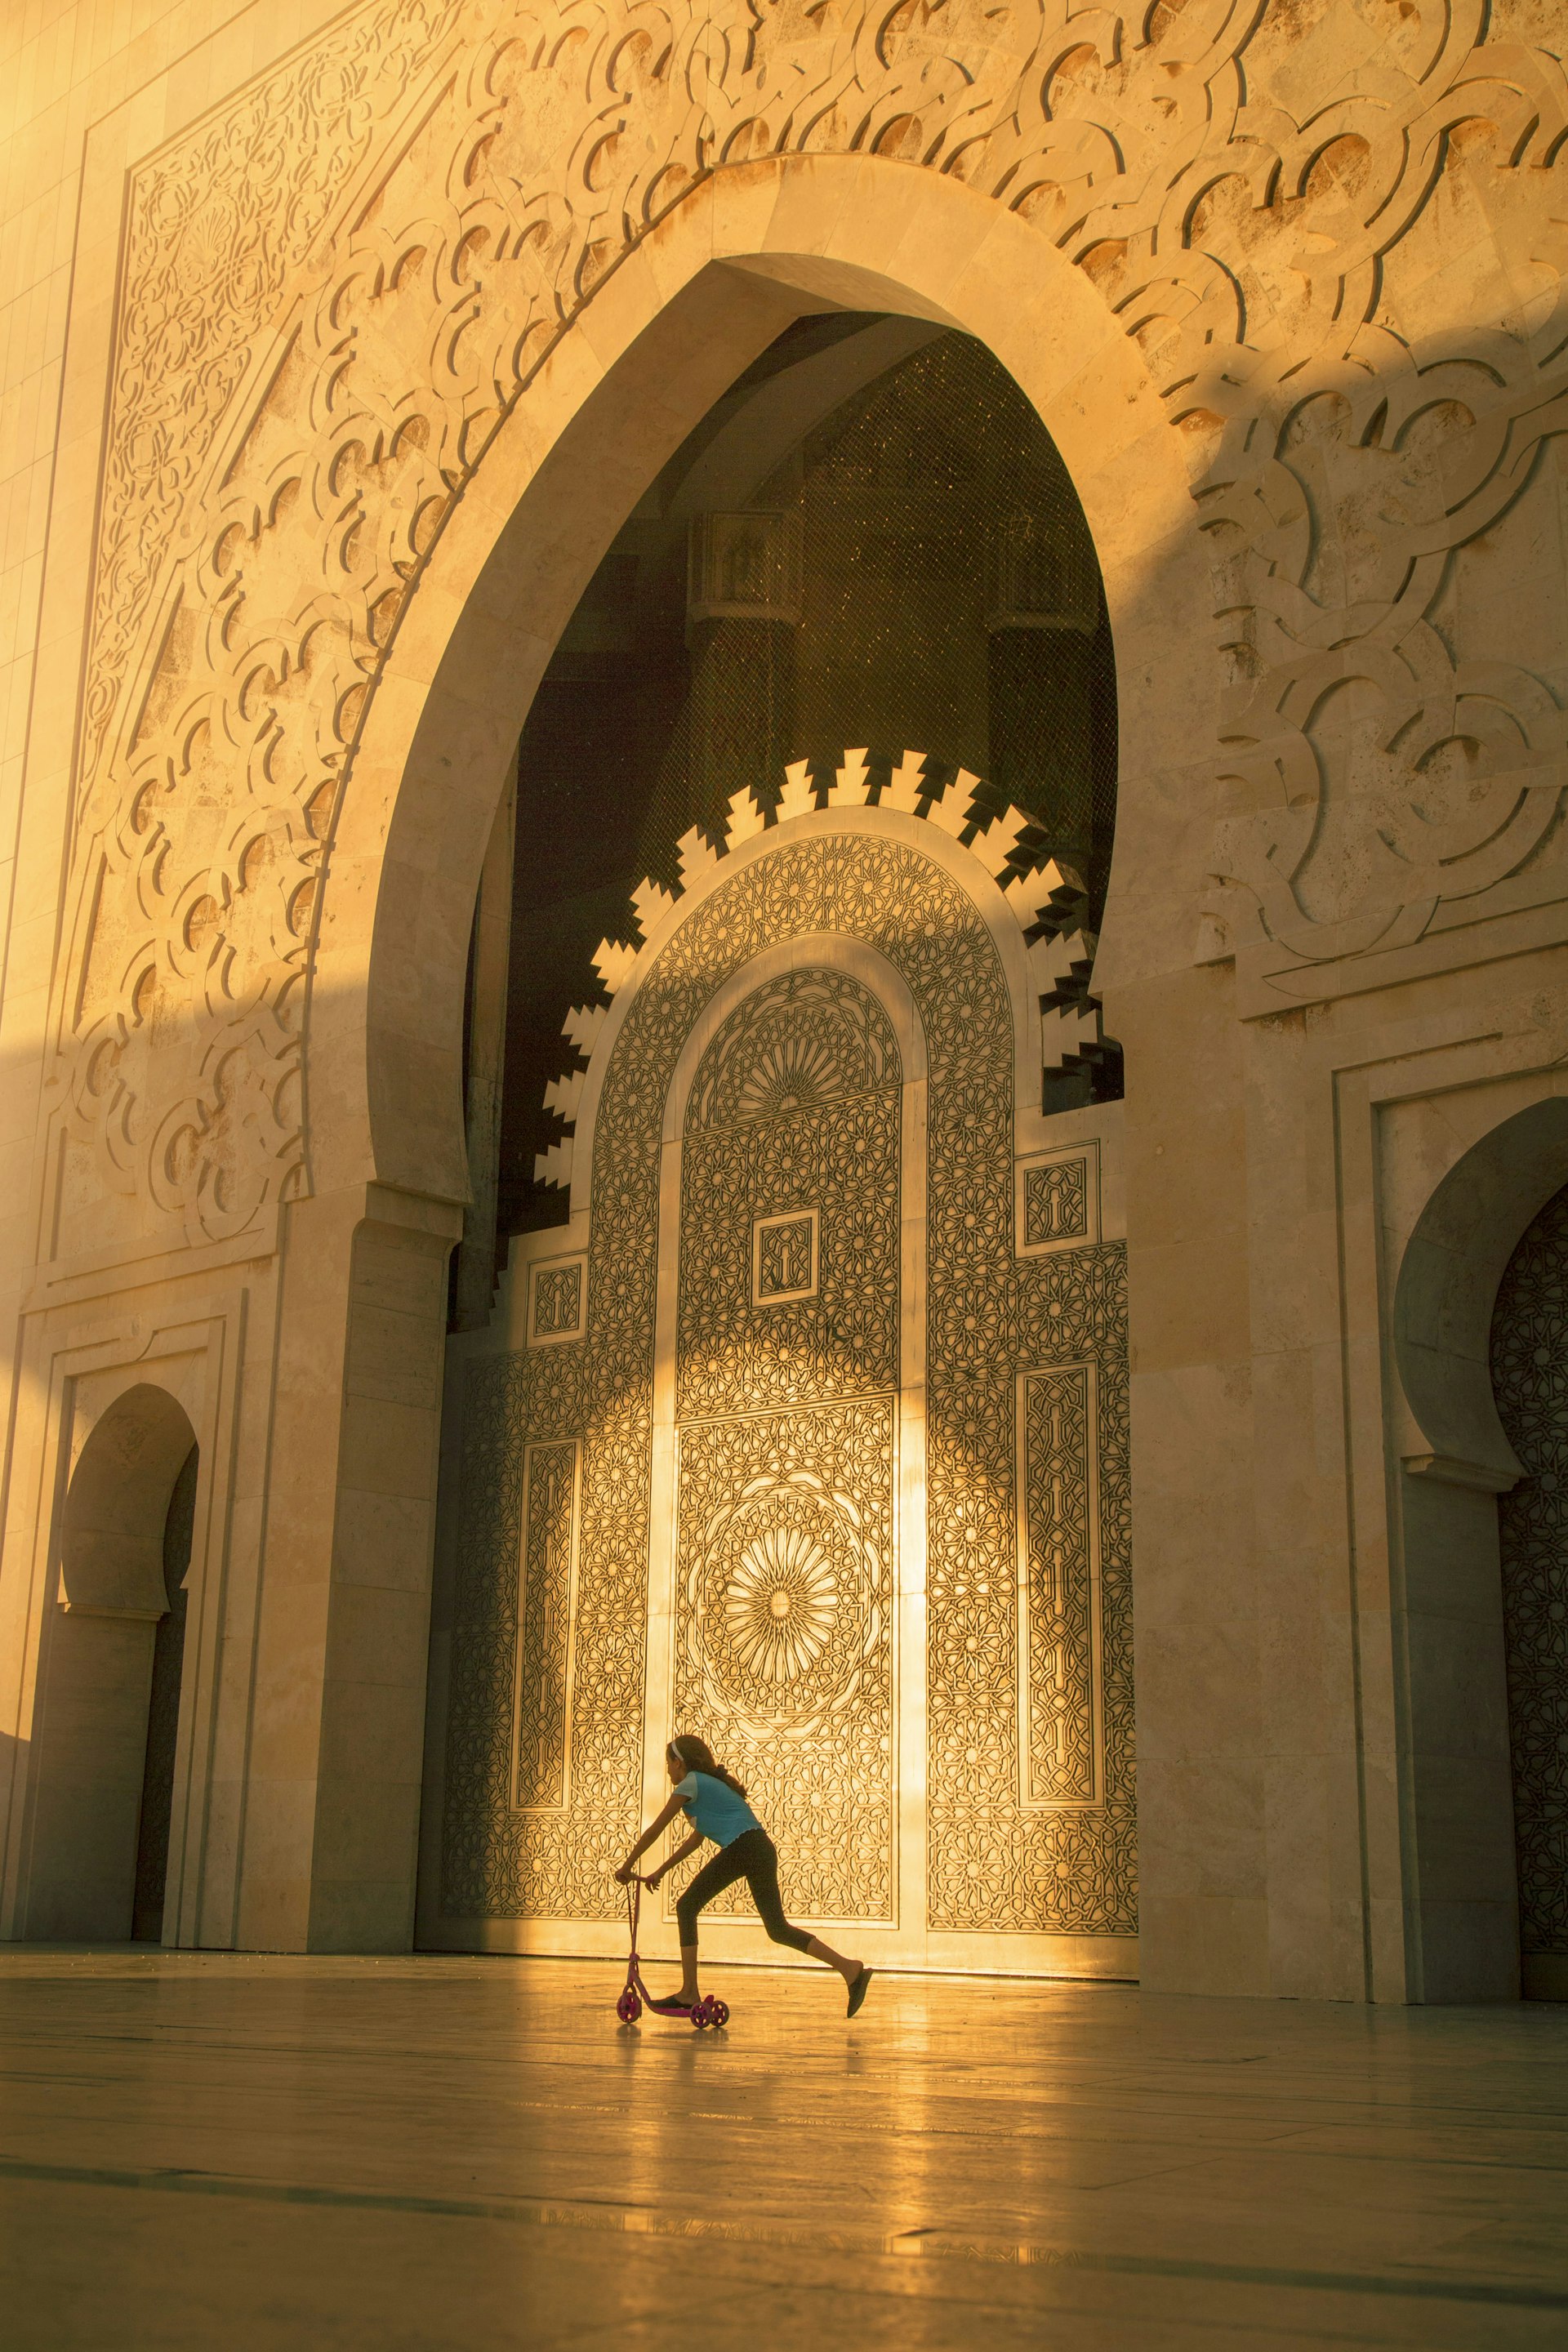 A mosque doorway bathed in golden light, as a young girls zips by on a scooter